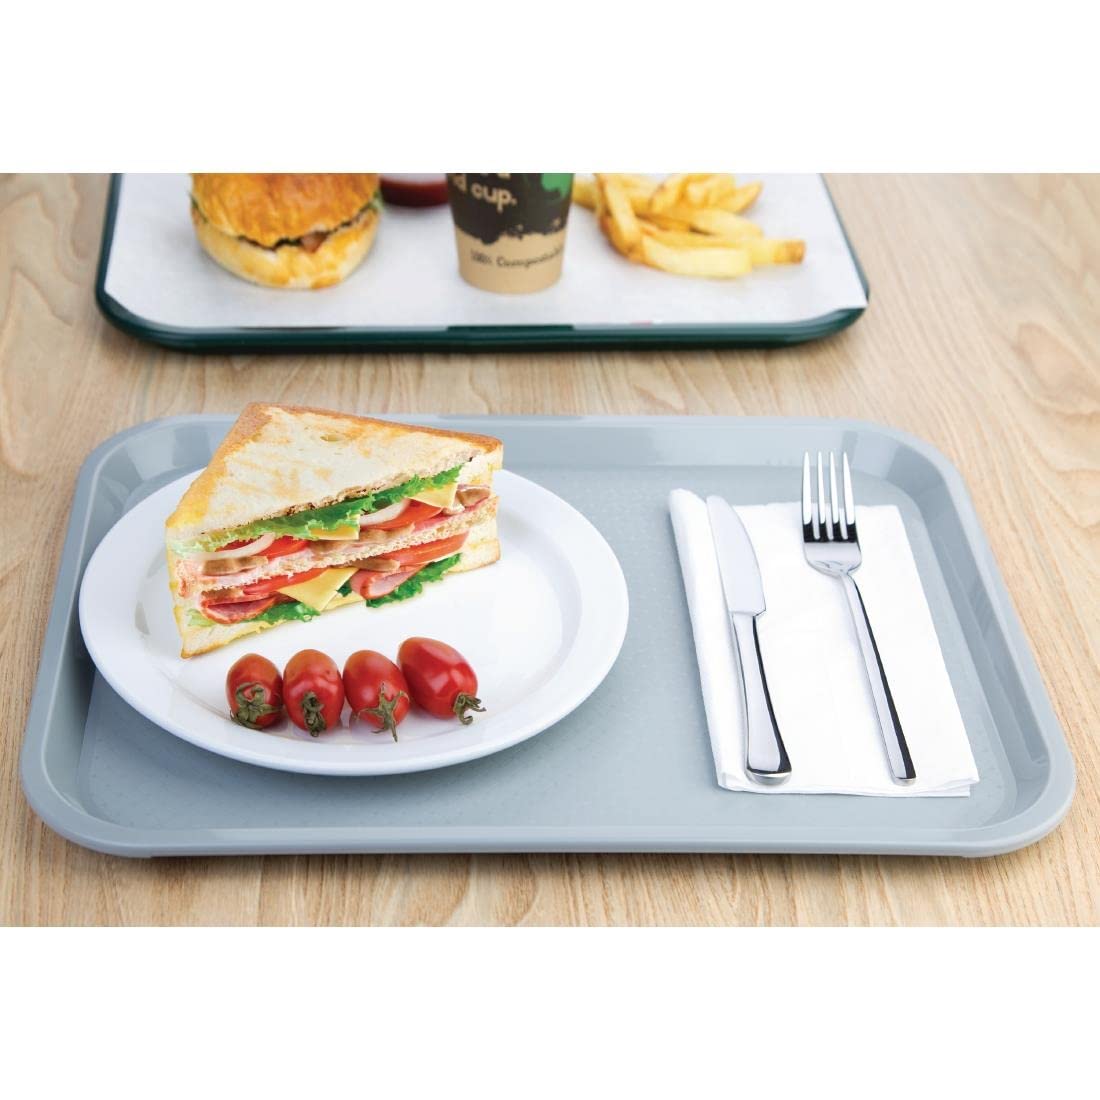 Carlisle FoodService Products CT121623 Café Standard Cafeteria / Fast Food Tray, 12